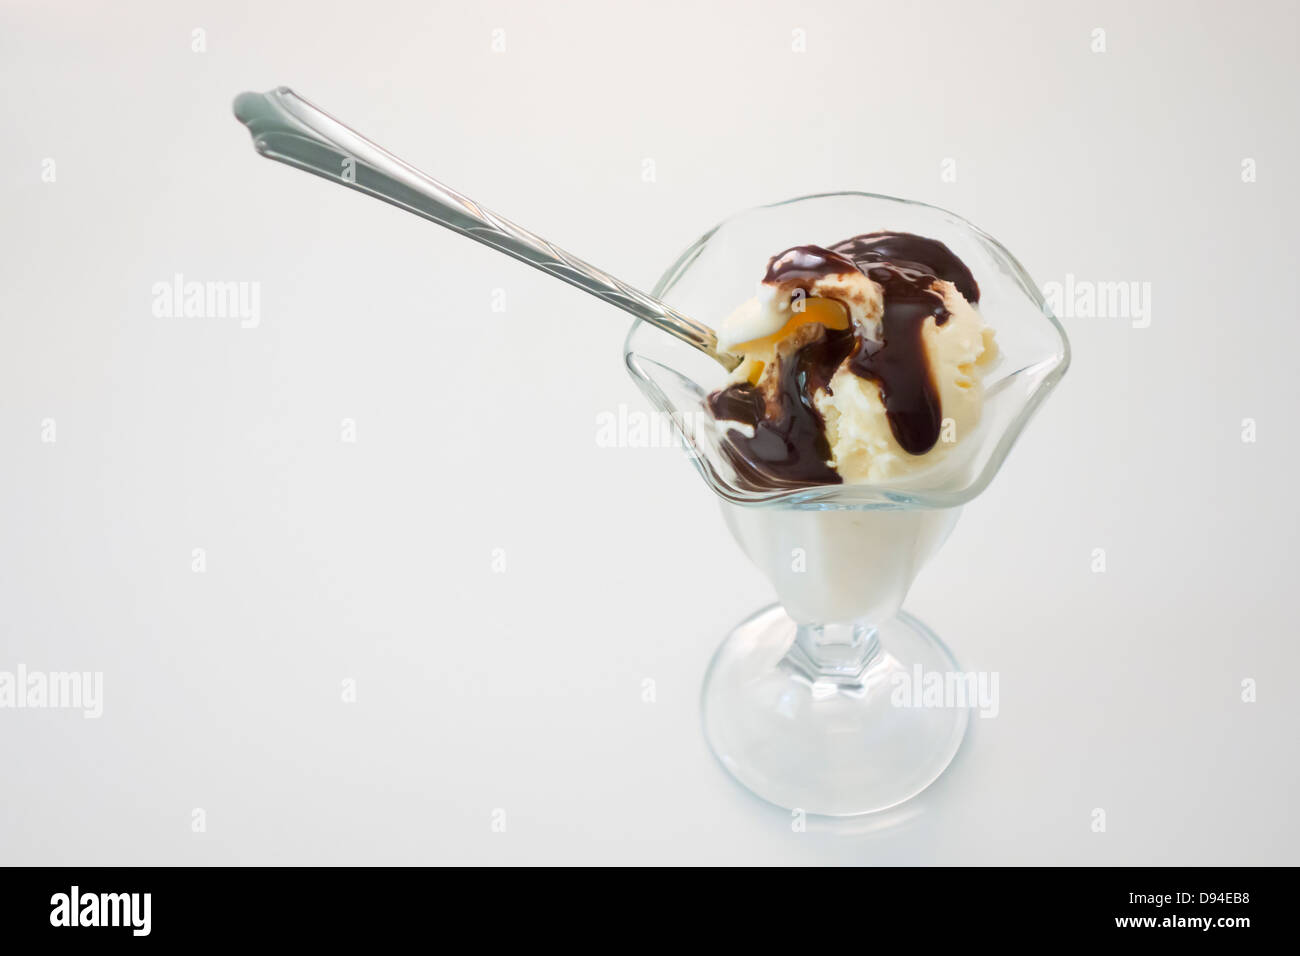 Vanilla ice cream with chocolate syrup in a dessert glass against a white background. Taken from above. Stock Photo